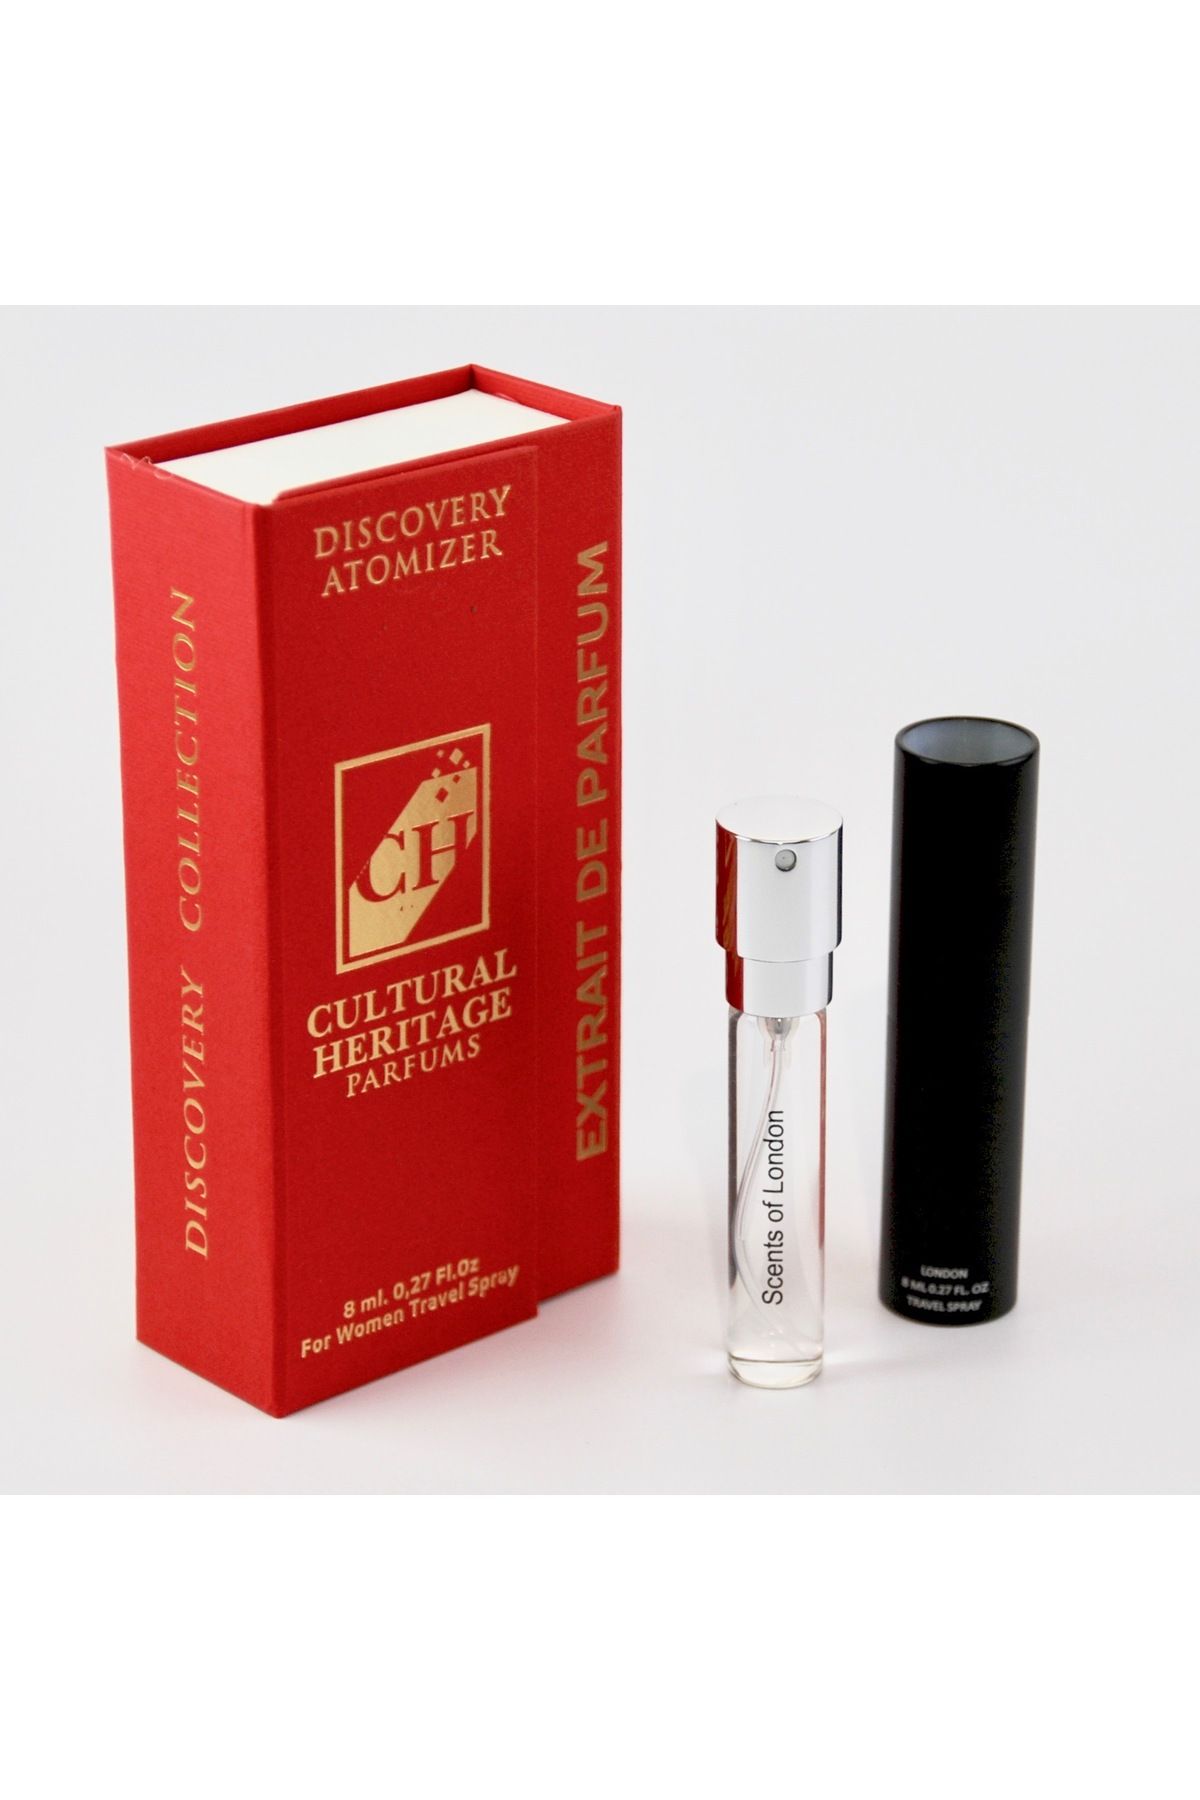 CH CULTURAL HERITAGE , Scents of London Discovery Atomizer Travel Spray , For Women,